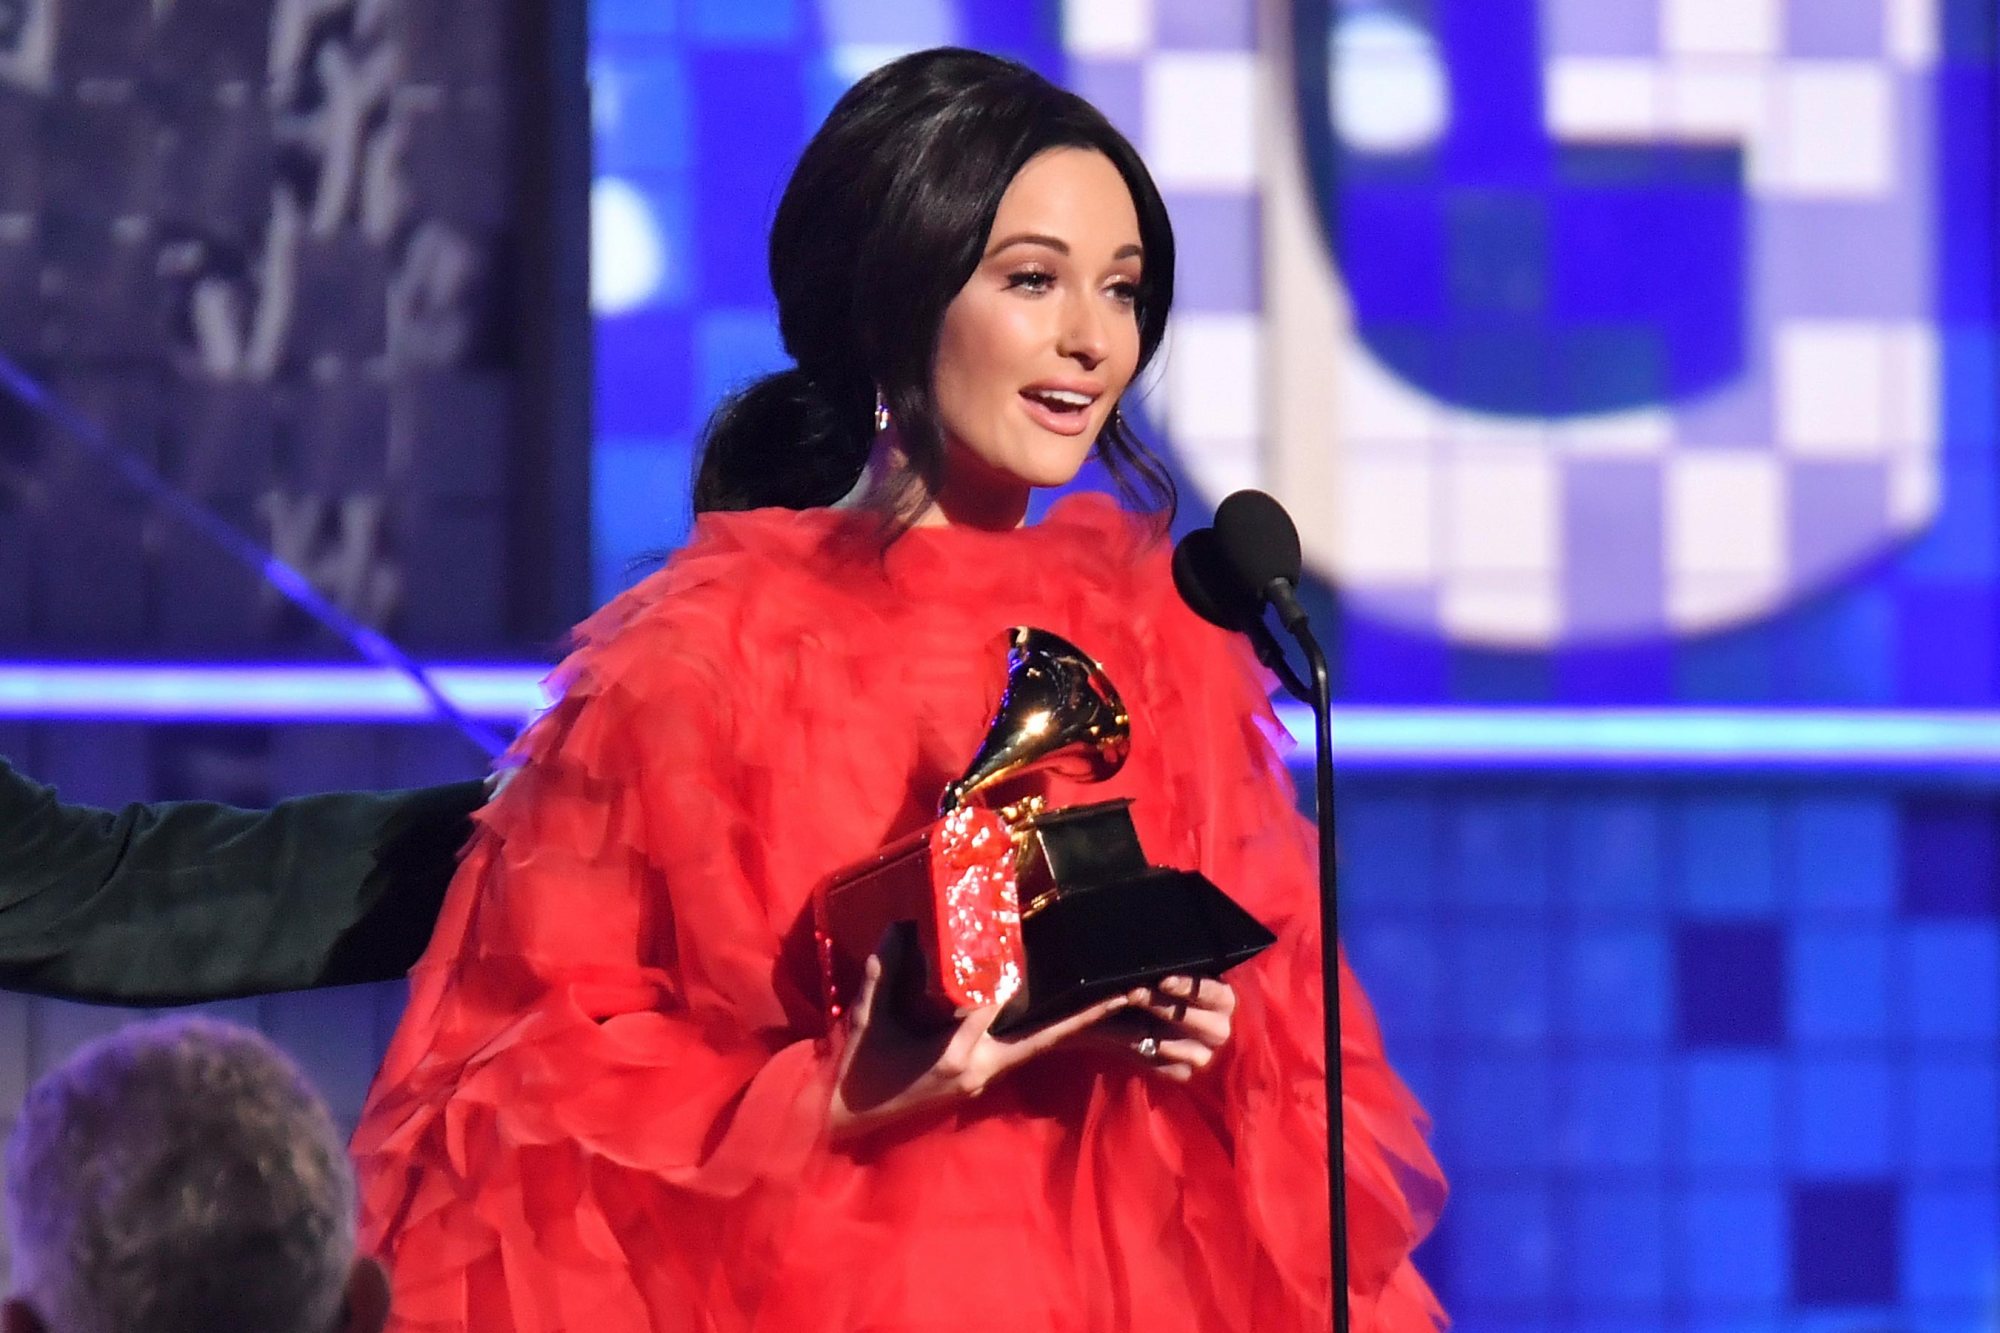 Kacey Musgraves wins Best Album of the Year 